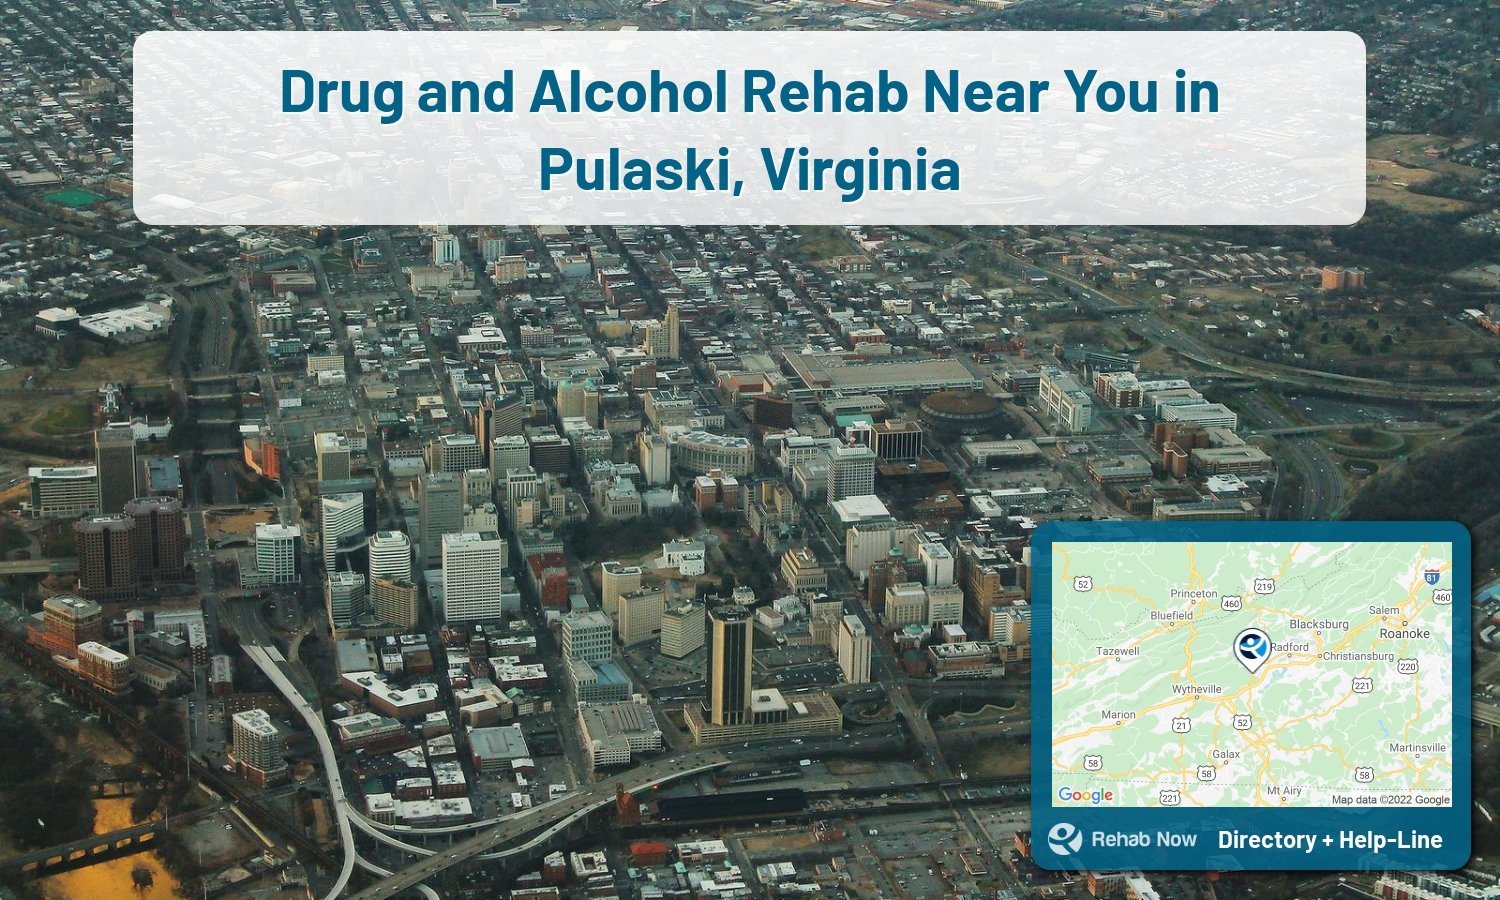 Drug rehab and alcohol treatment services near you in Pulaski, Virginia. Need help choosing a center? Call us, free.